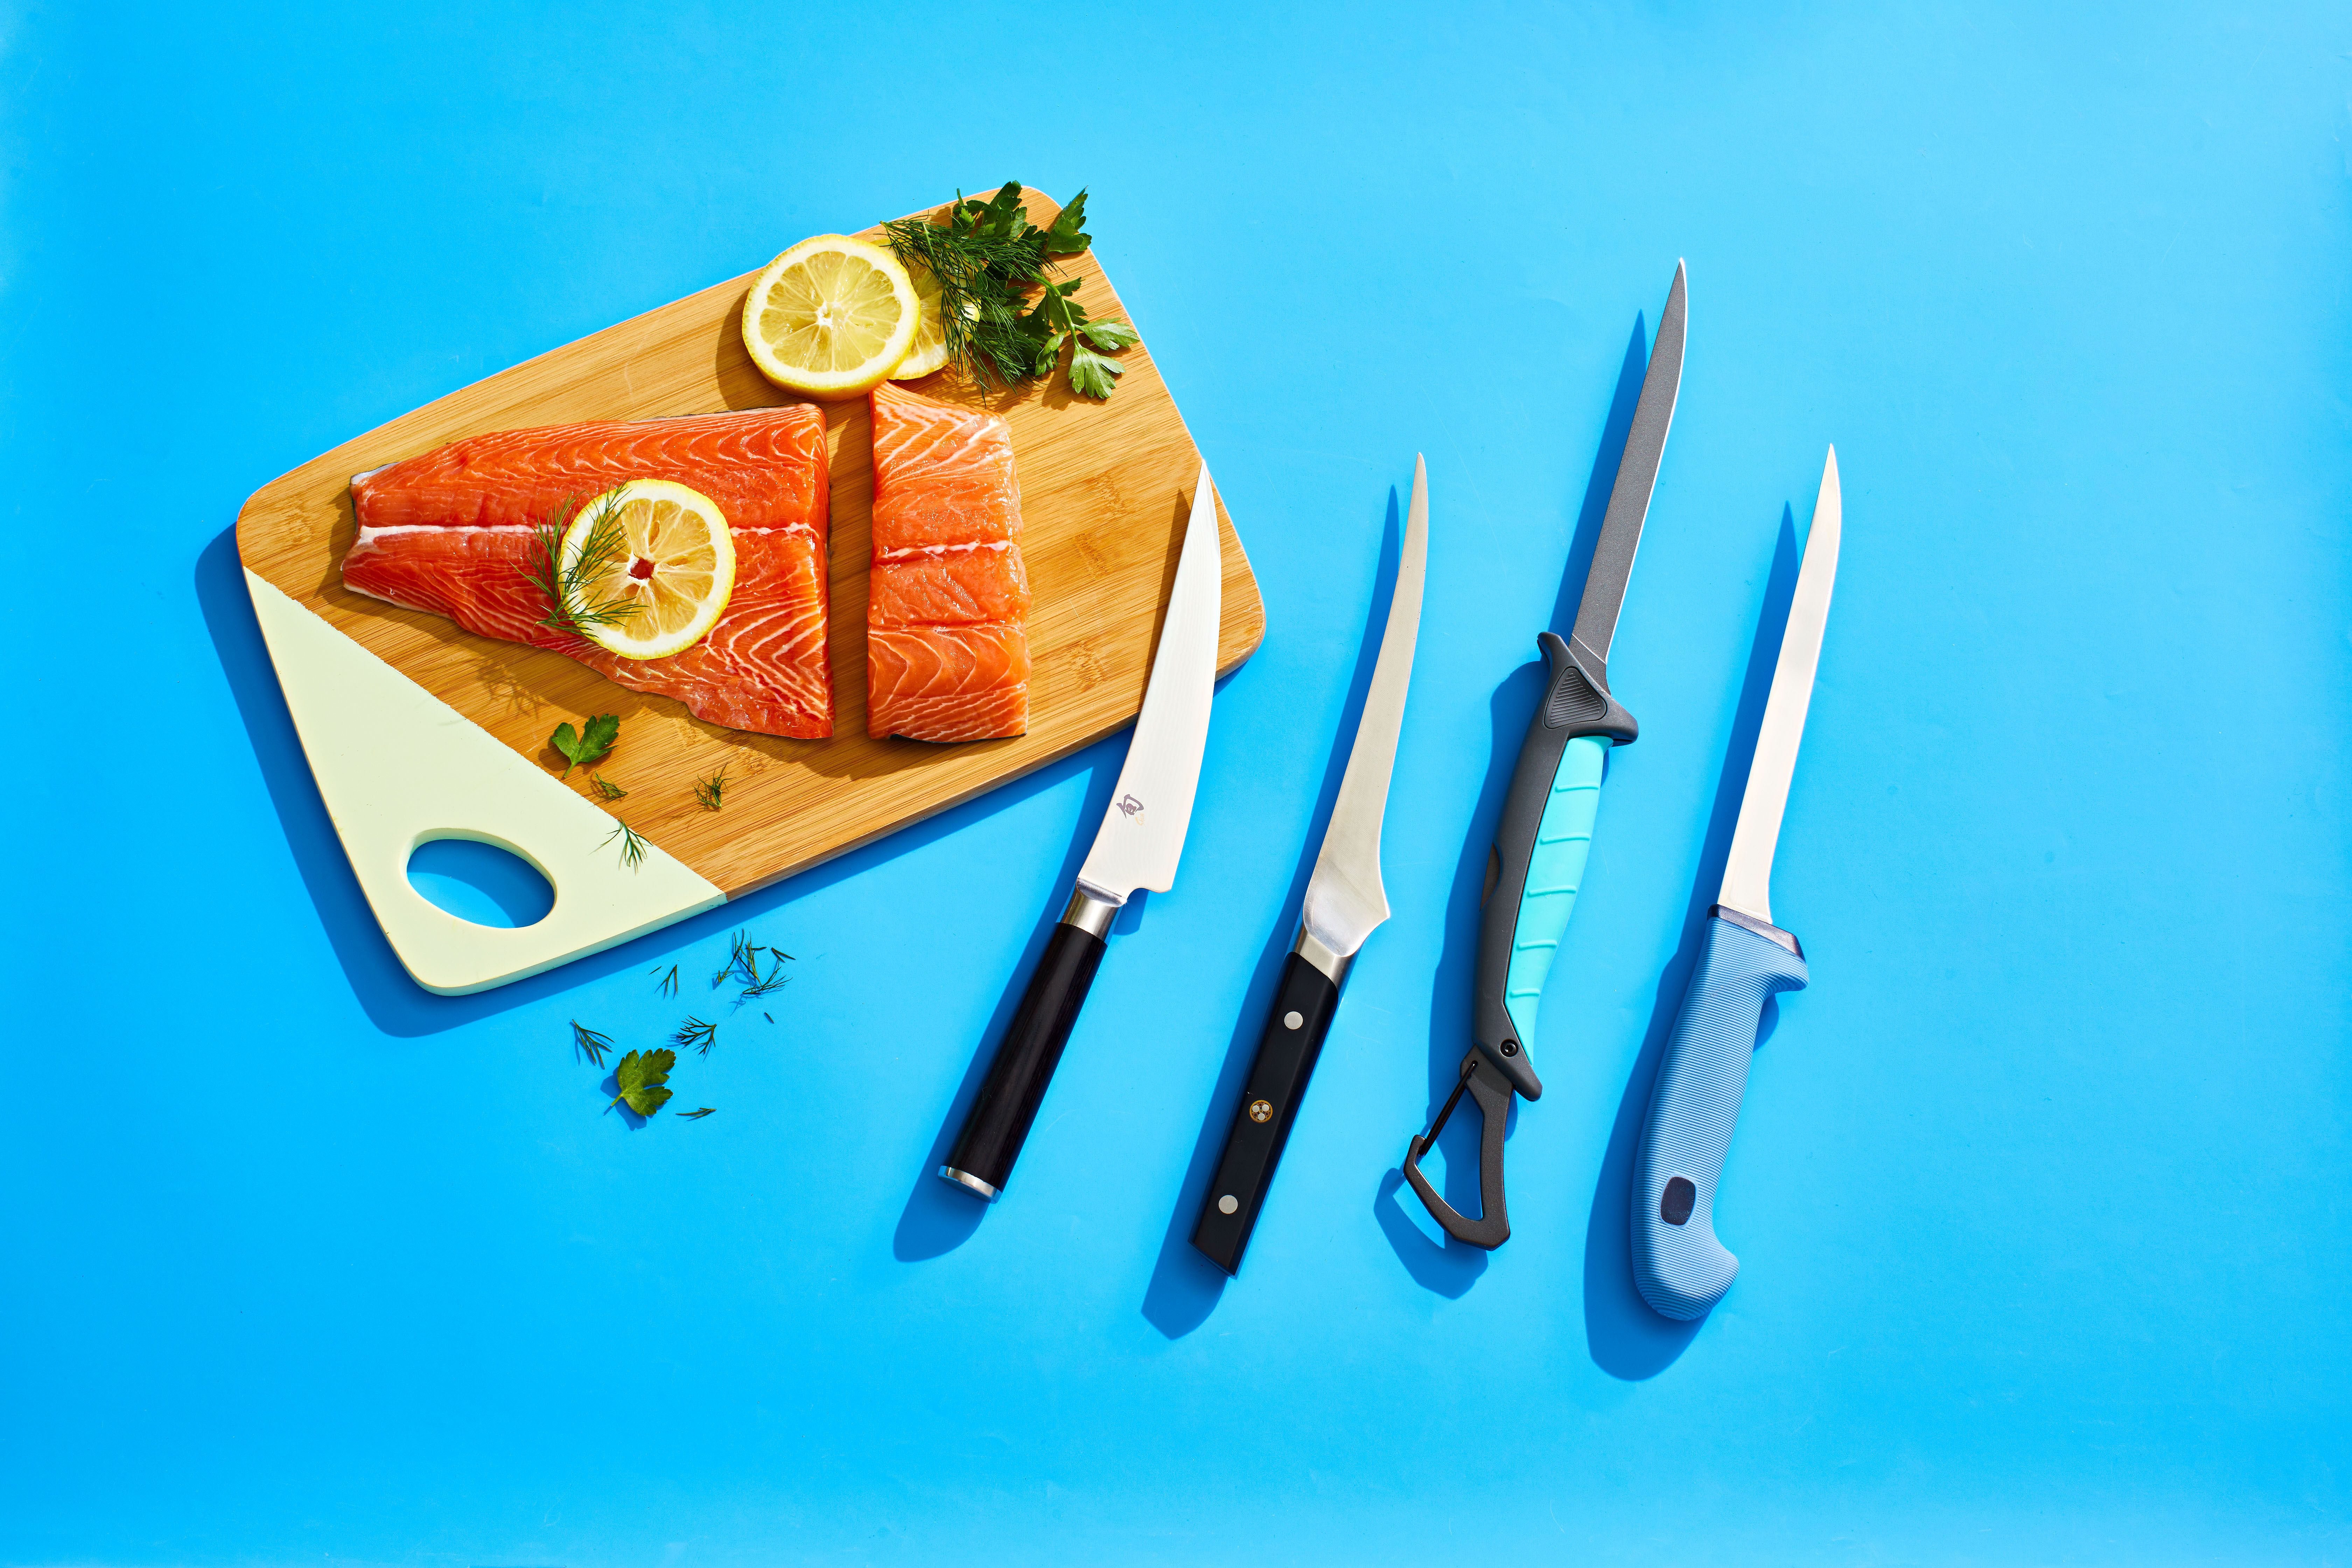 The knives I use- the best knives for kitchen, field, fish and